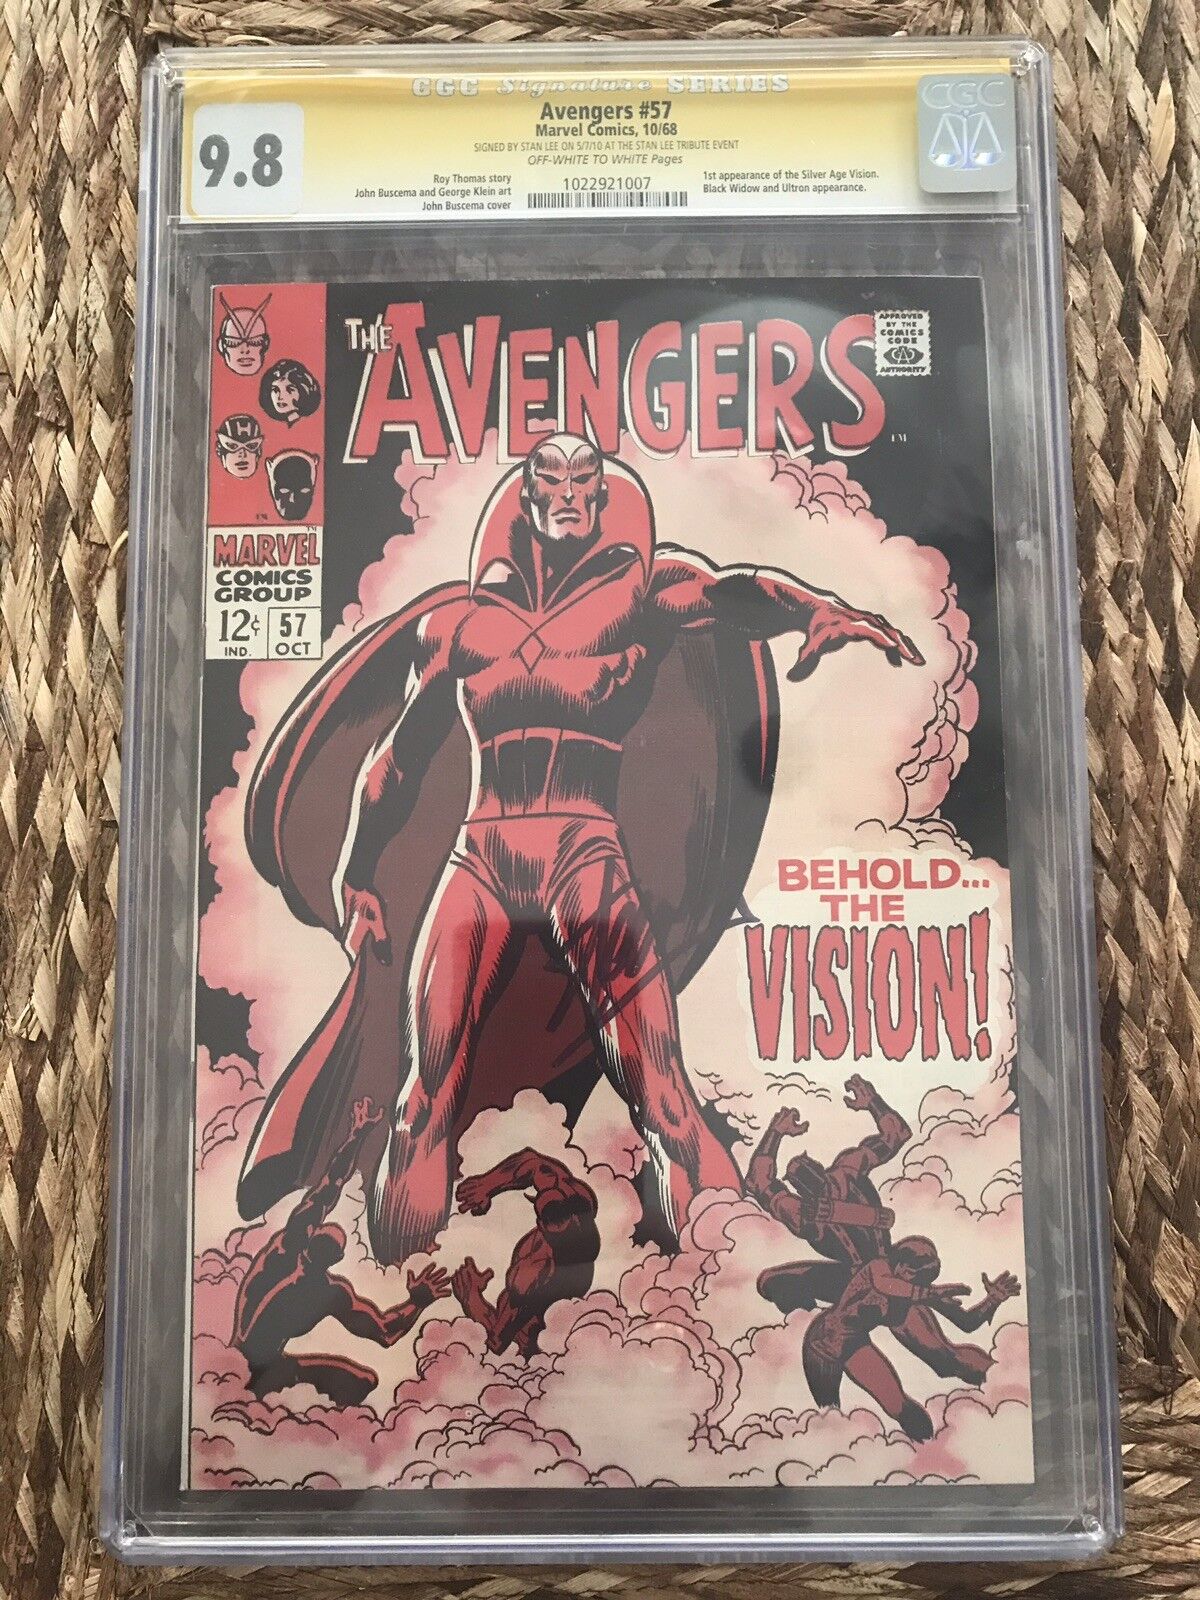 The Avengers #57 Cgc 9.8 SS Lee 1 Of 2 In Existence - 1st Appearance Of Vision